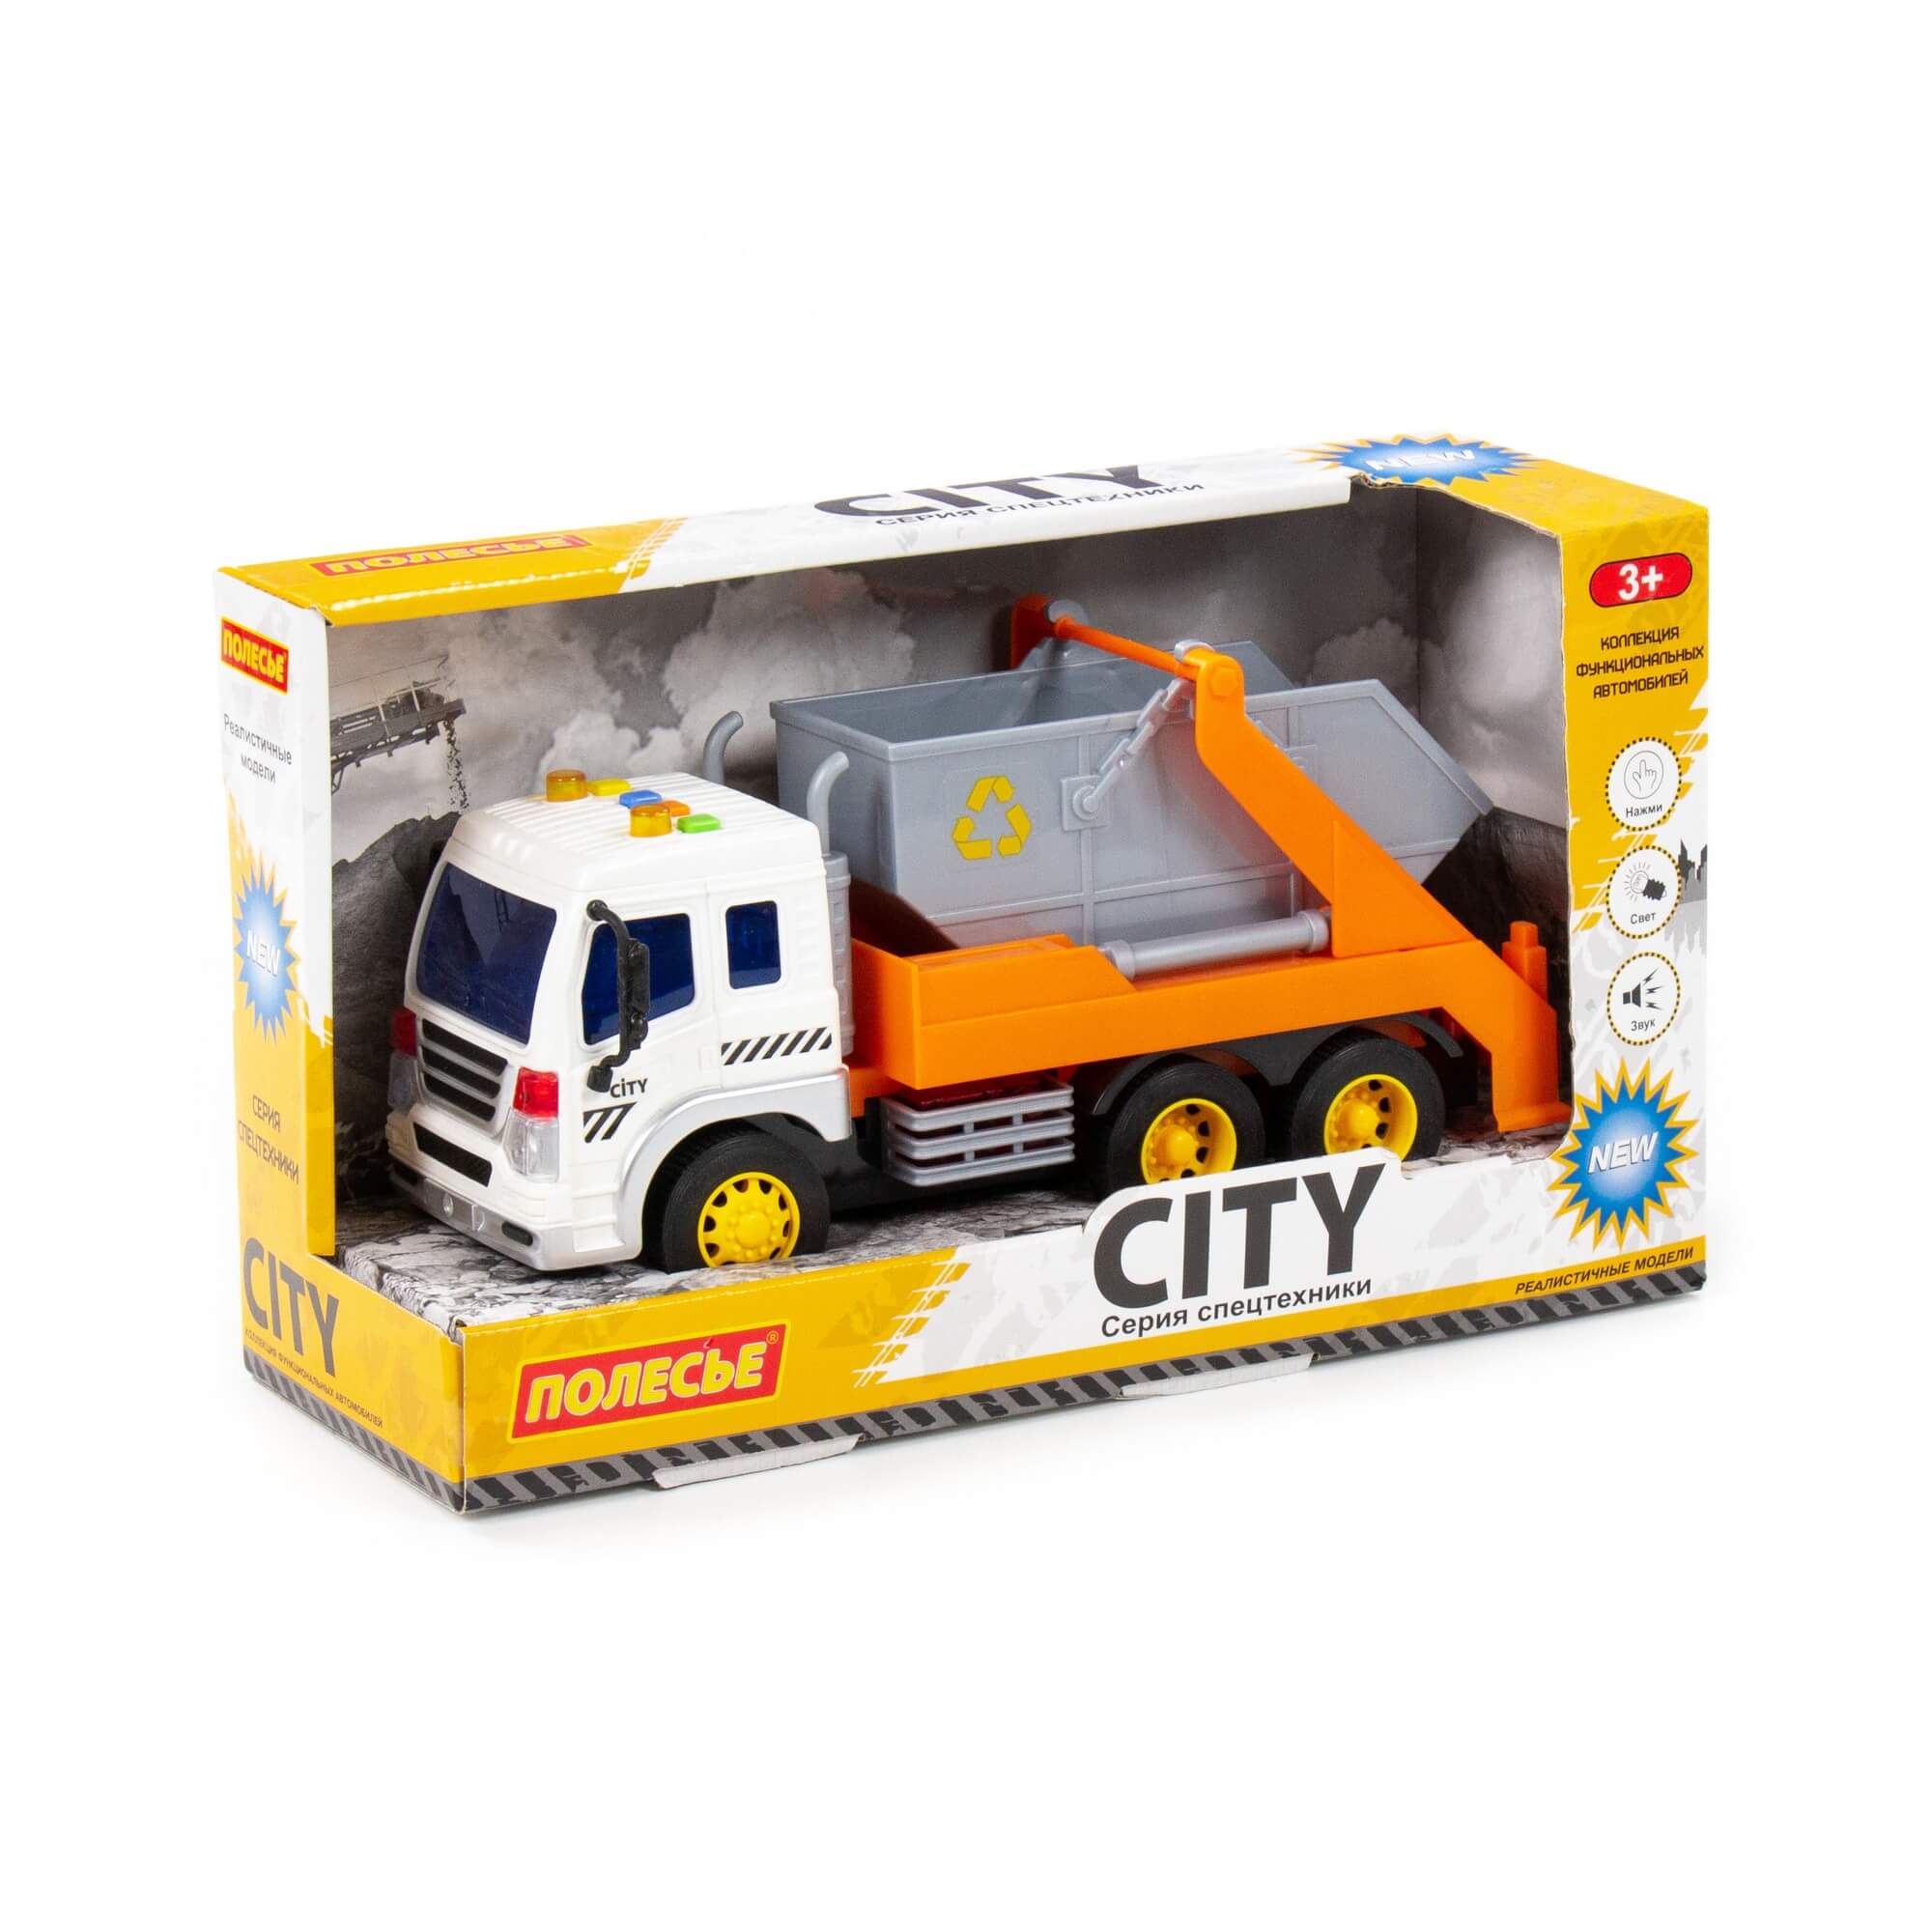 City container truck (box)